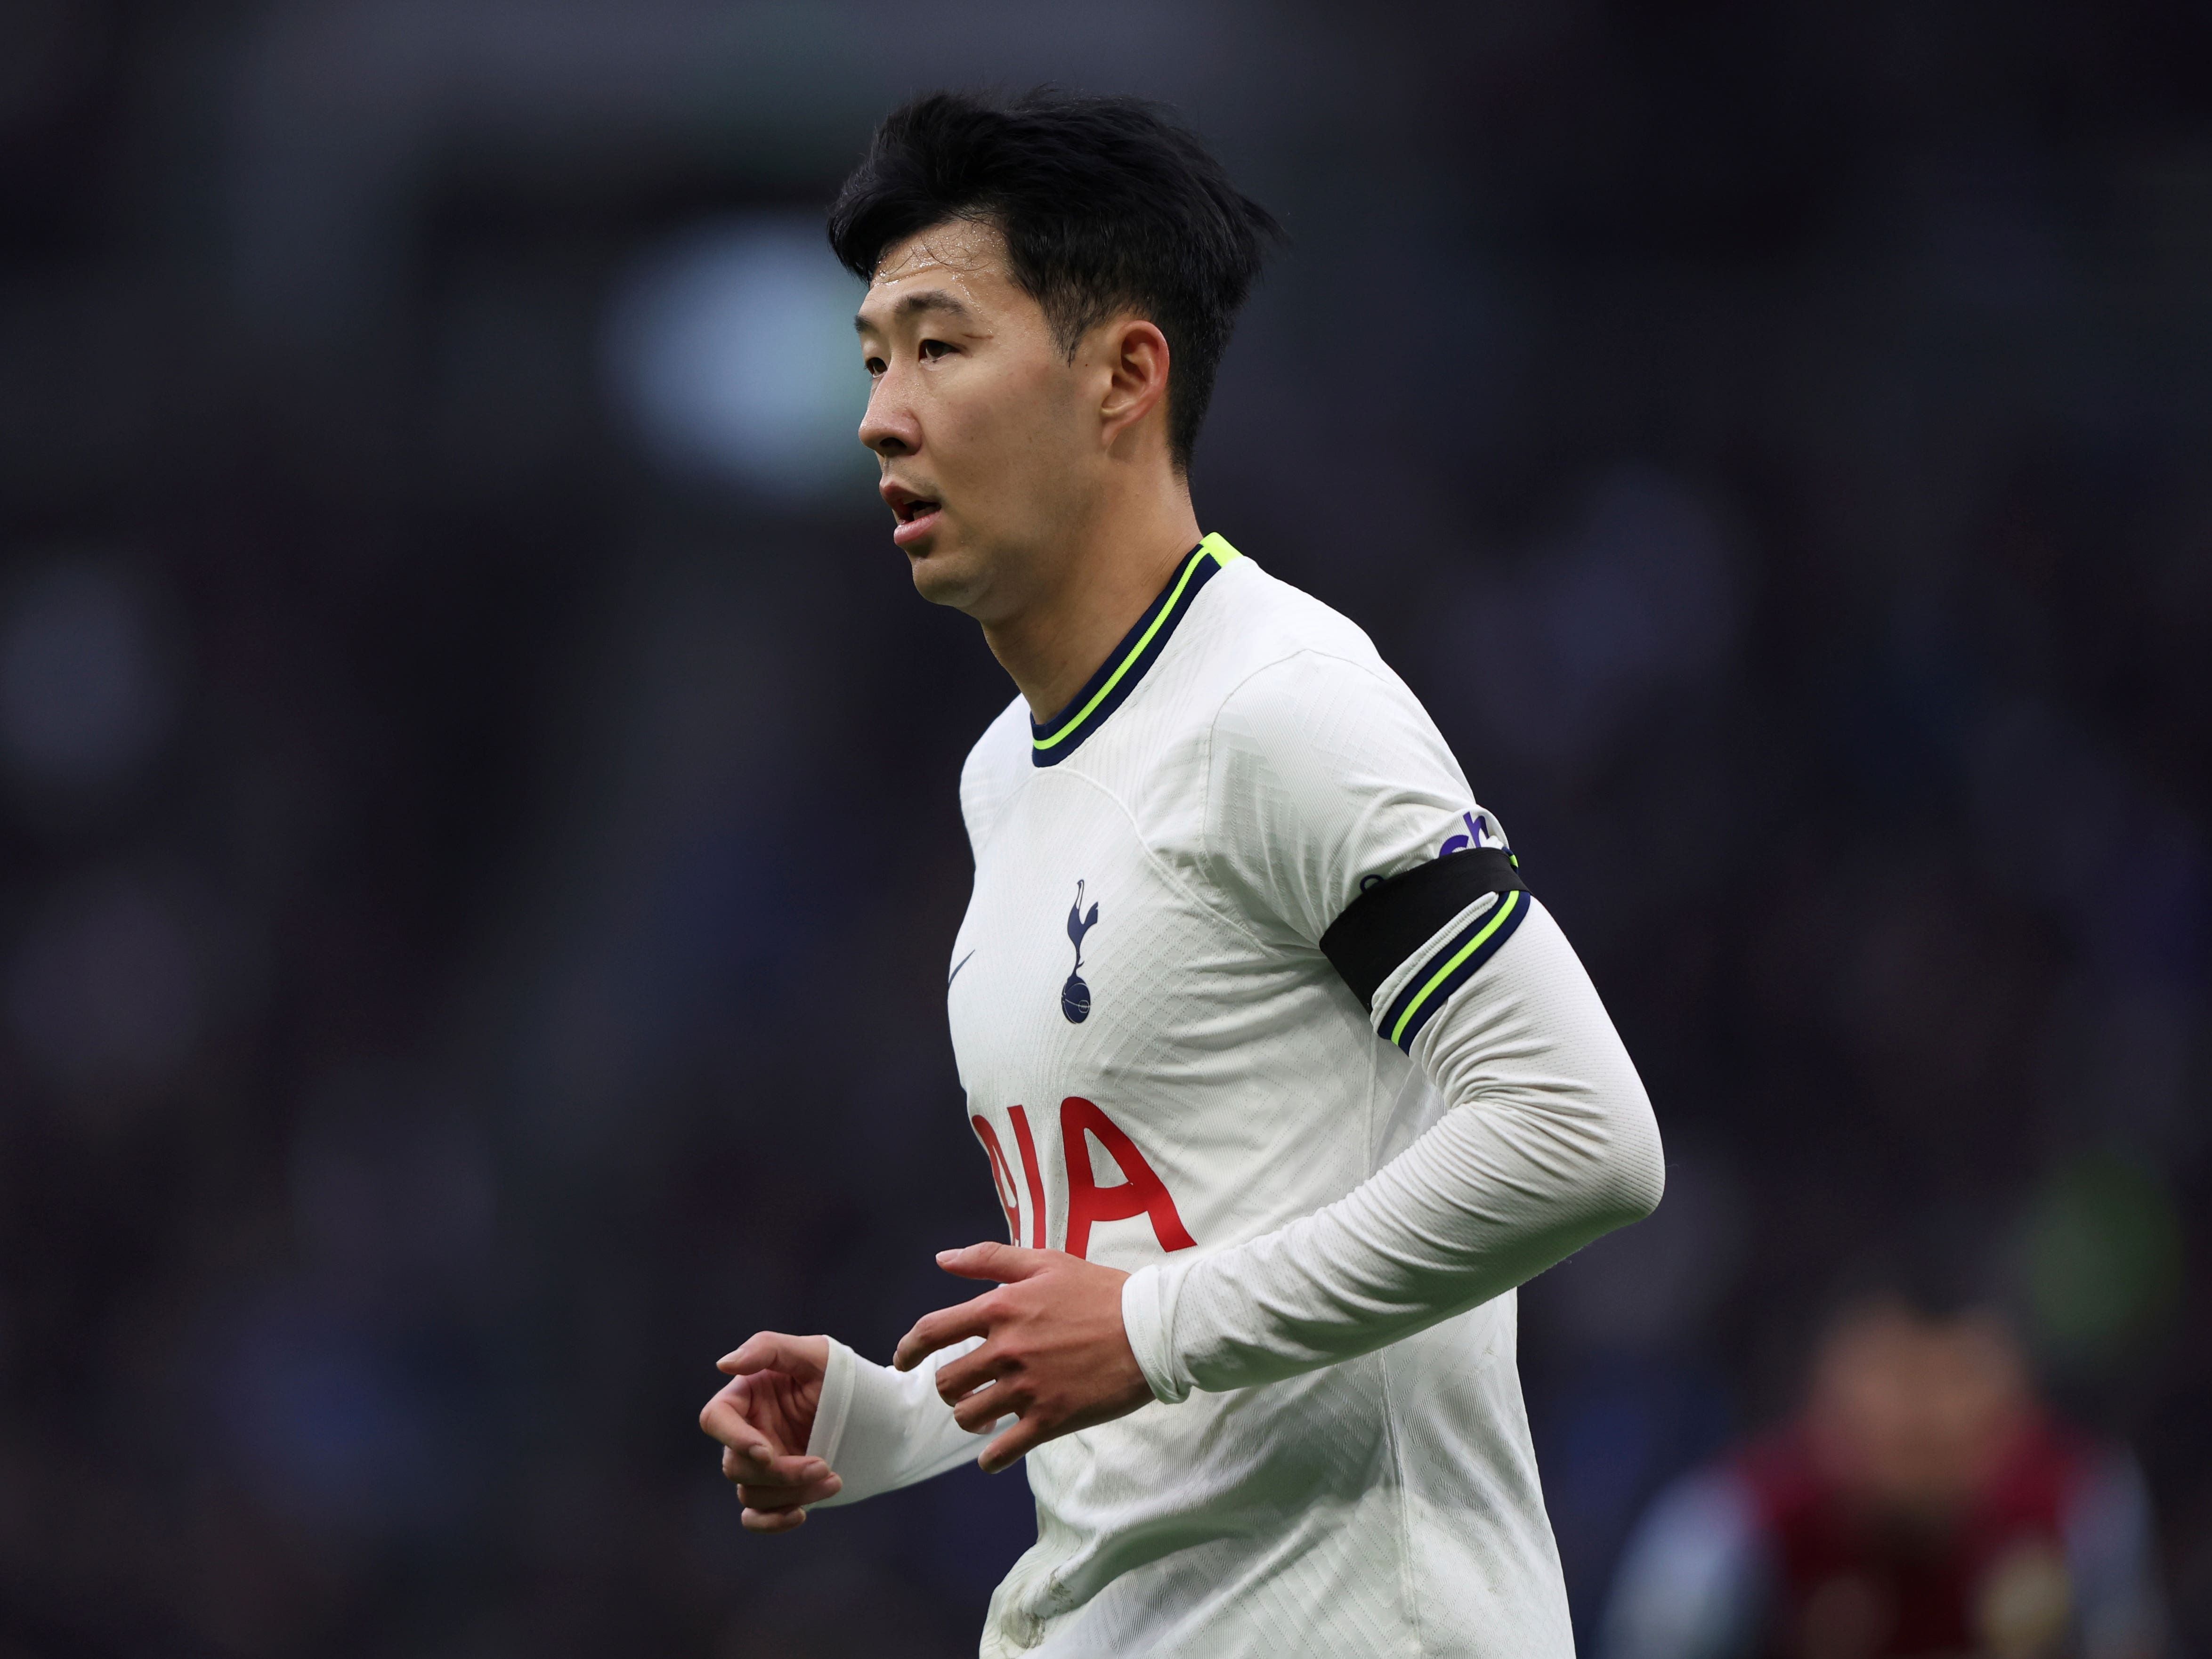 Spurs boss Antonio Conte convinced Son Heung-min will soon be back to his best